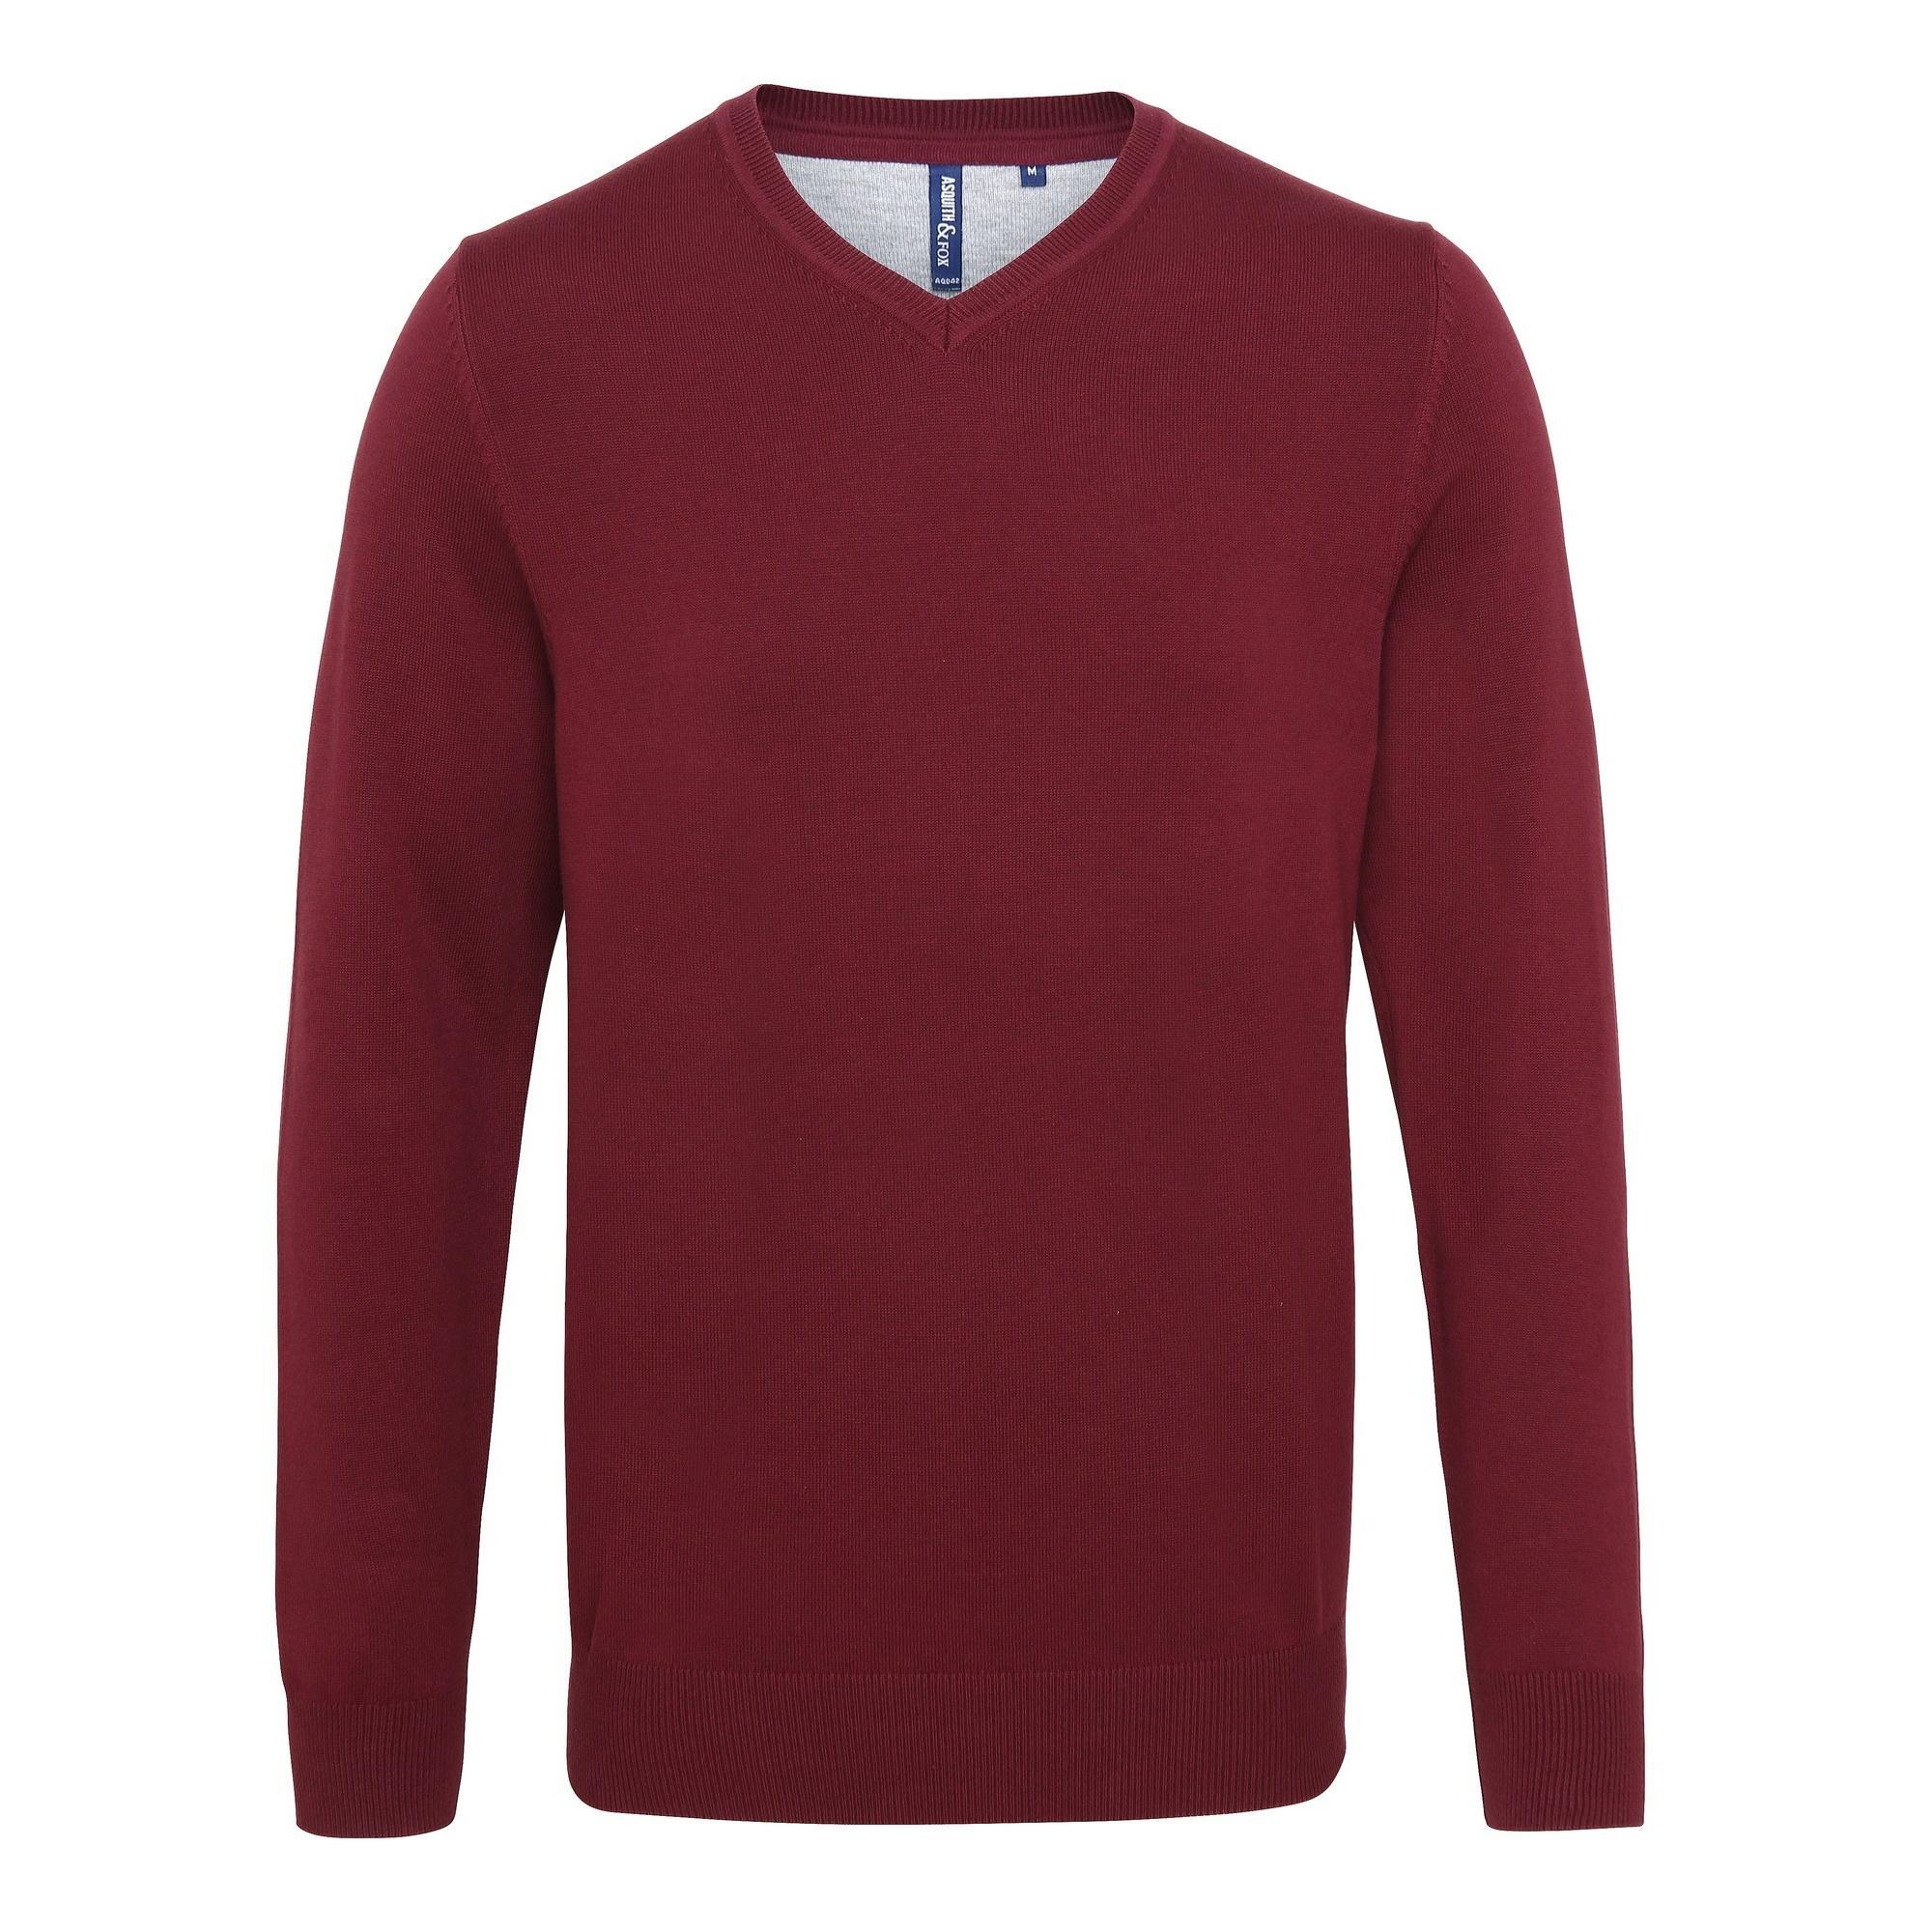 Asquith & Fox Mens Cotton Rich V-Neck Sweater (Burgundy) (S)